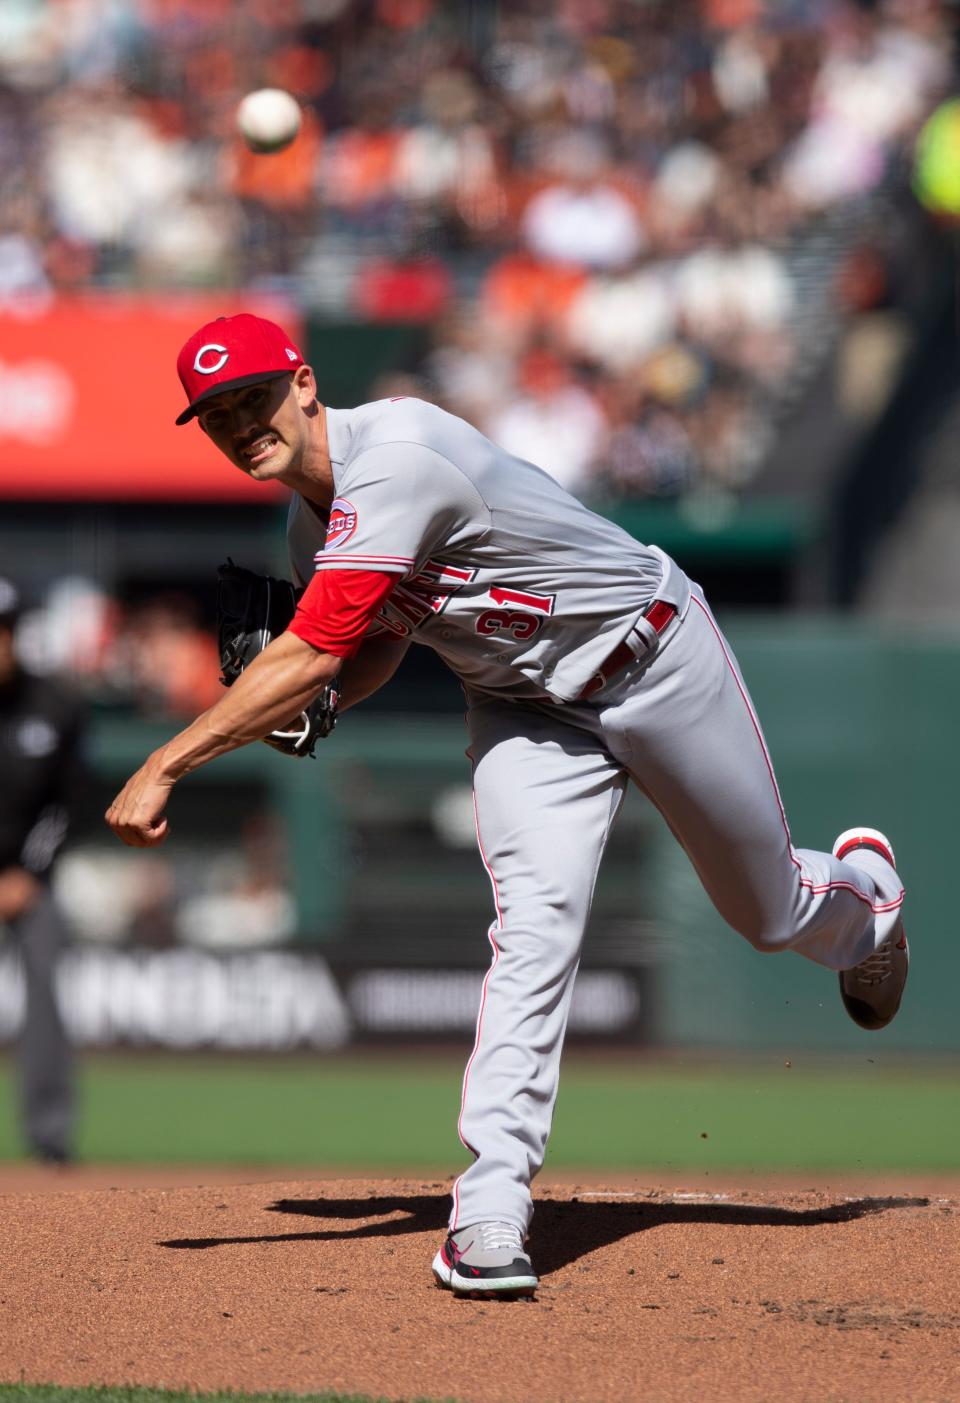 Jun 25, 2022; San Francisco, California, USA; Cincinnati Reds starting pitcher Mike Minor (31) delivers a pitch against the San Francisco Giants during the first inning at Oracle Park. Mandatory Credit: D. Ross Cameron-USA TODAY Sports